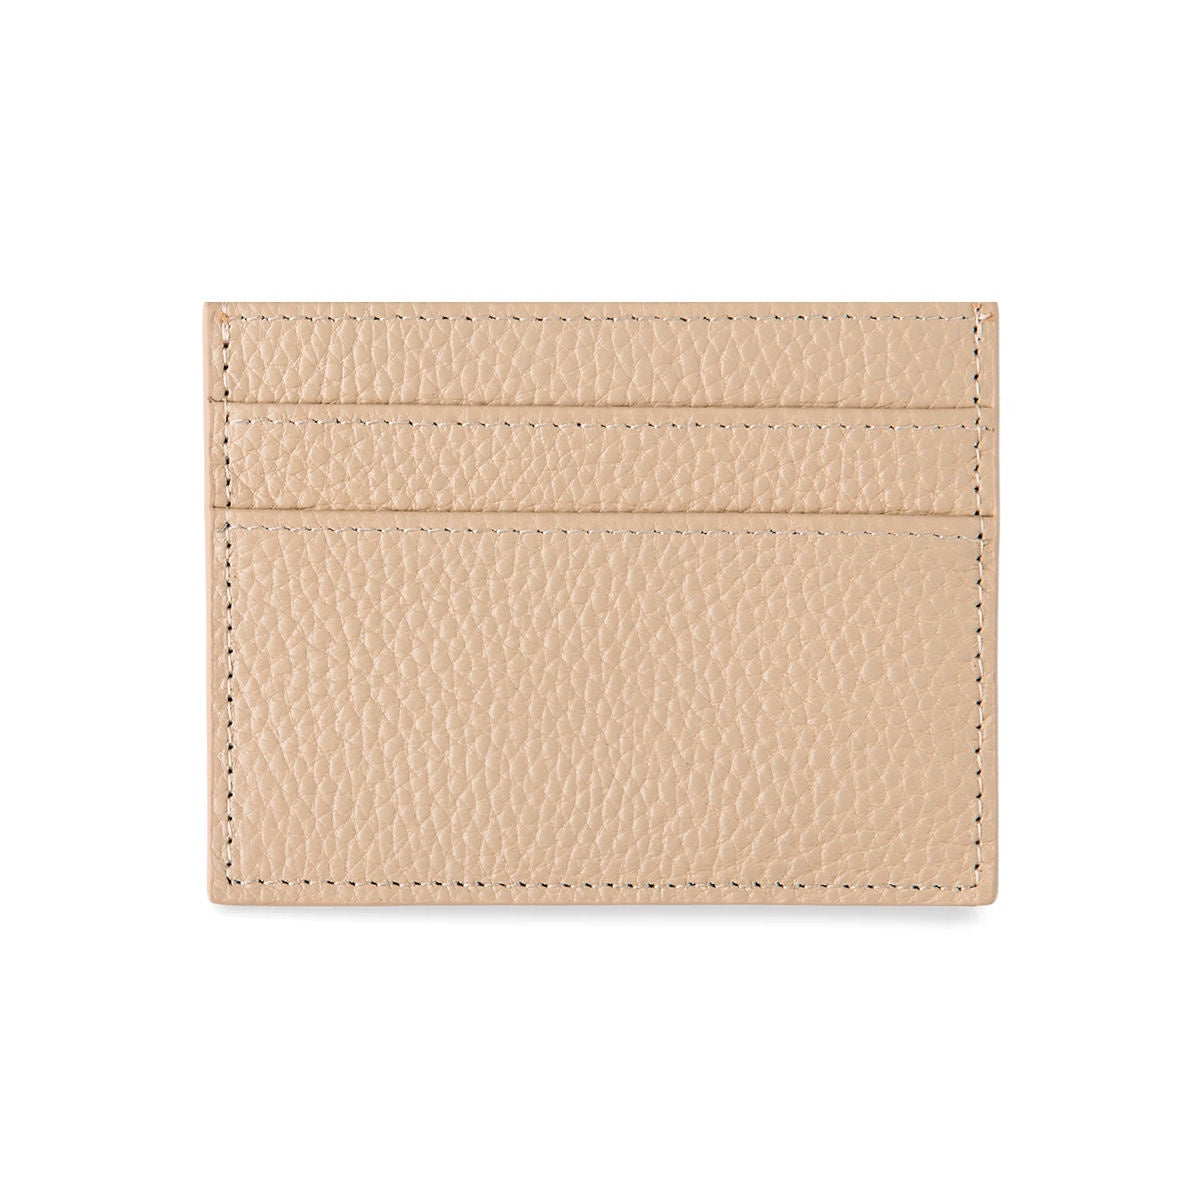 Double Cardholder - Taupe Pebble Leather